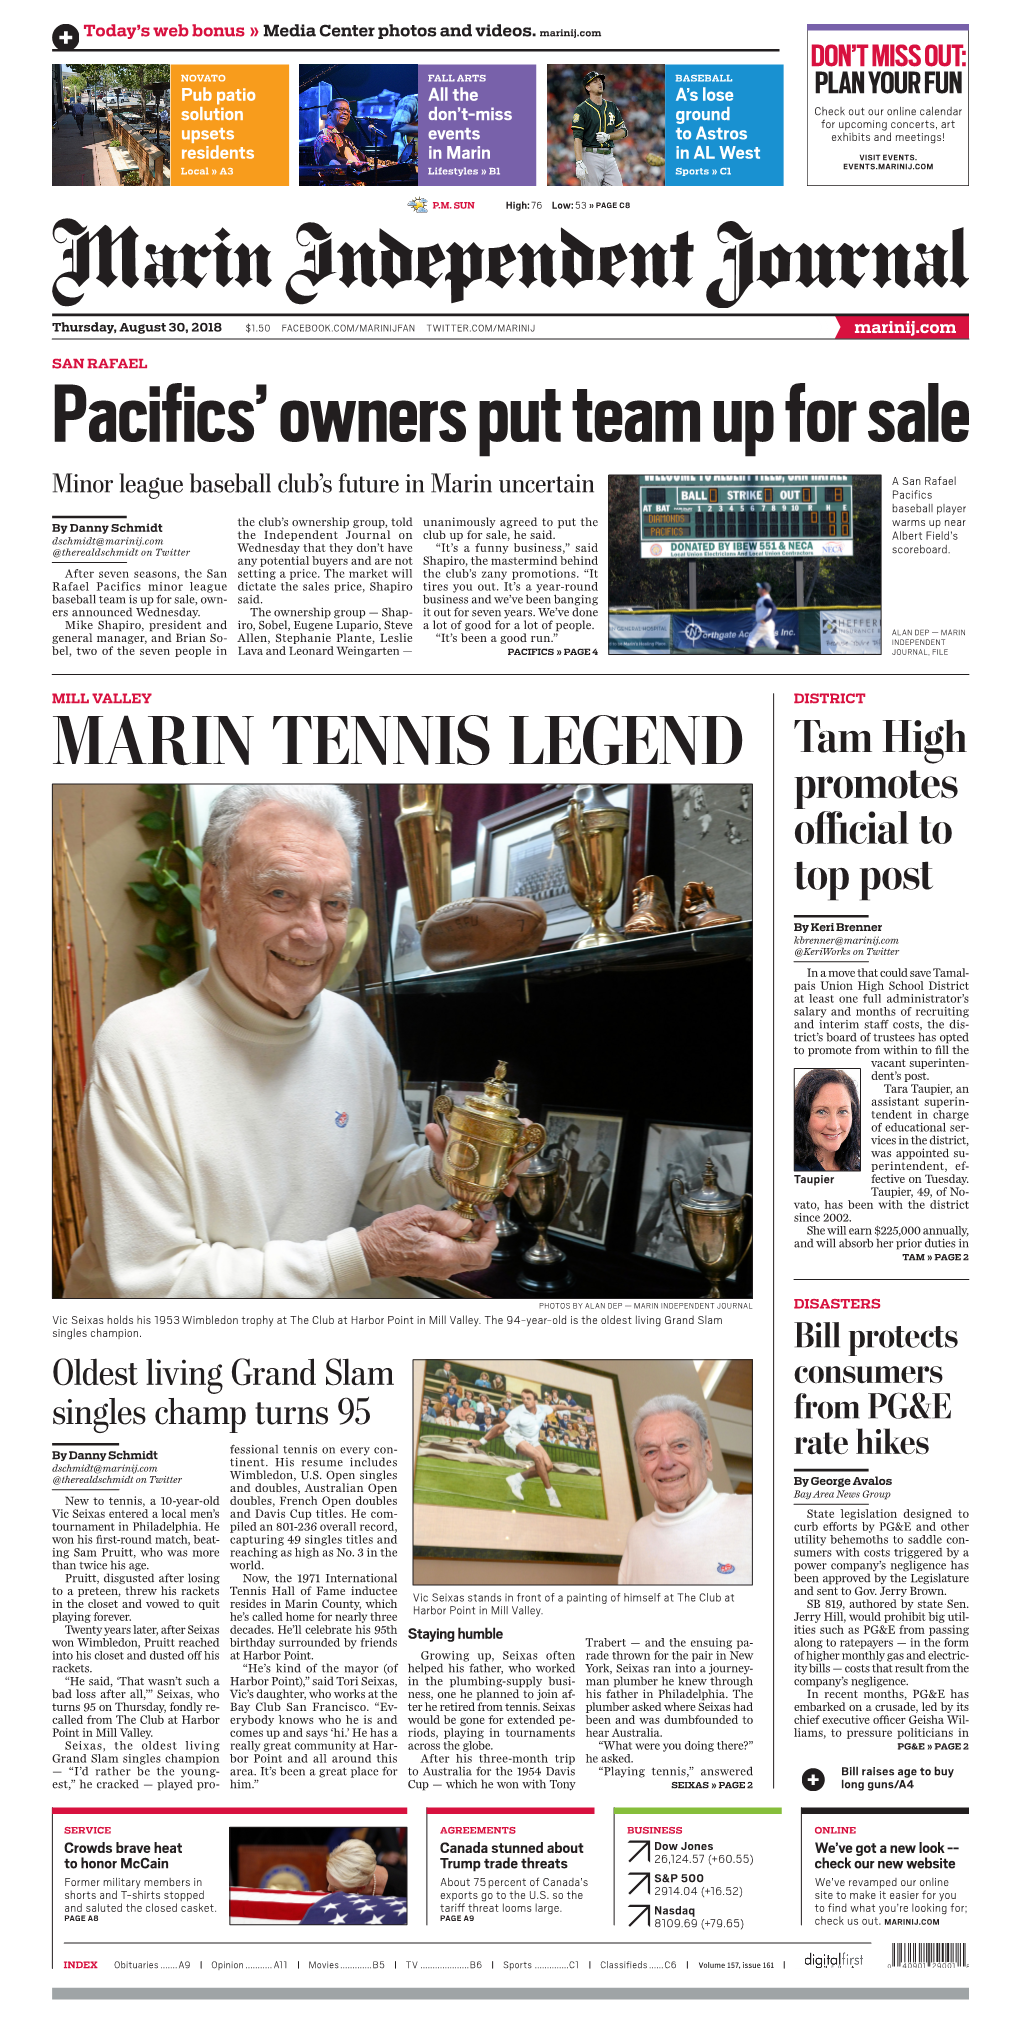 MARIN TENNIS LEGEND Tam High Promotes Official to Top Post